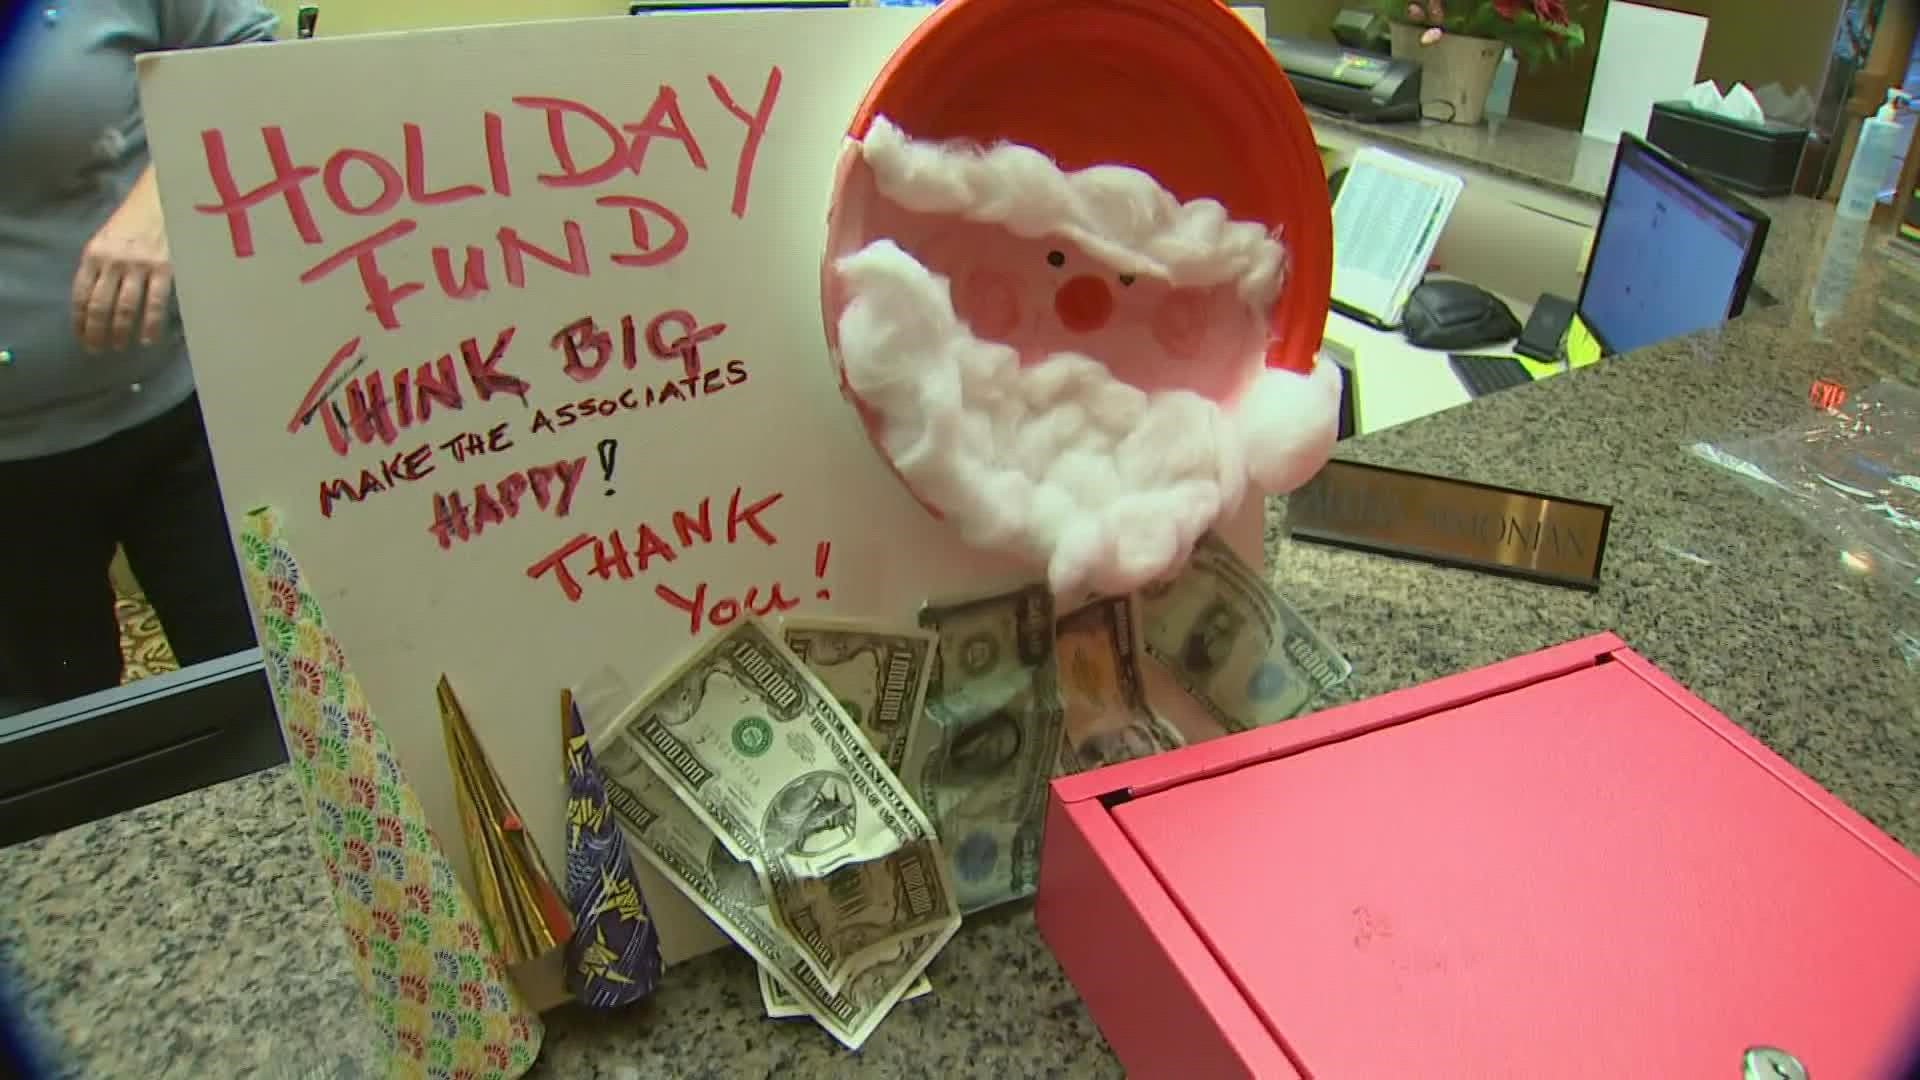 Christmas came early for employees at a Bellevue retirement community. The gift didn’t come from the company, but from the residents they care for.